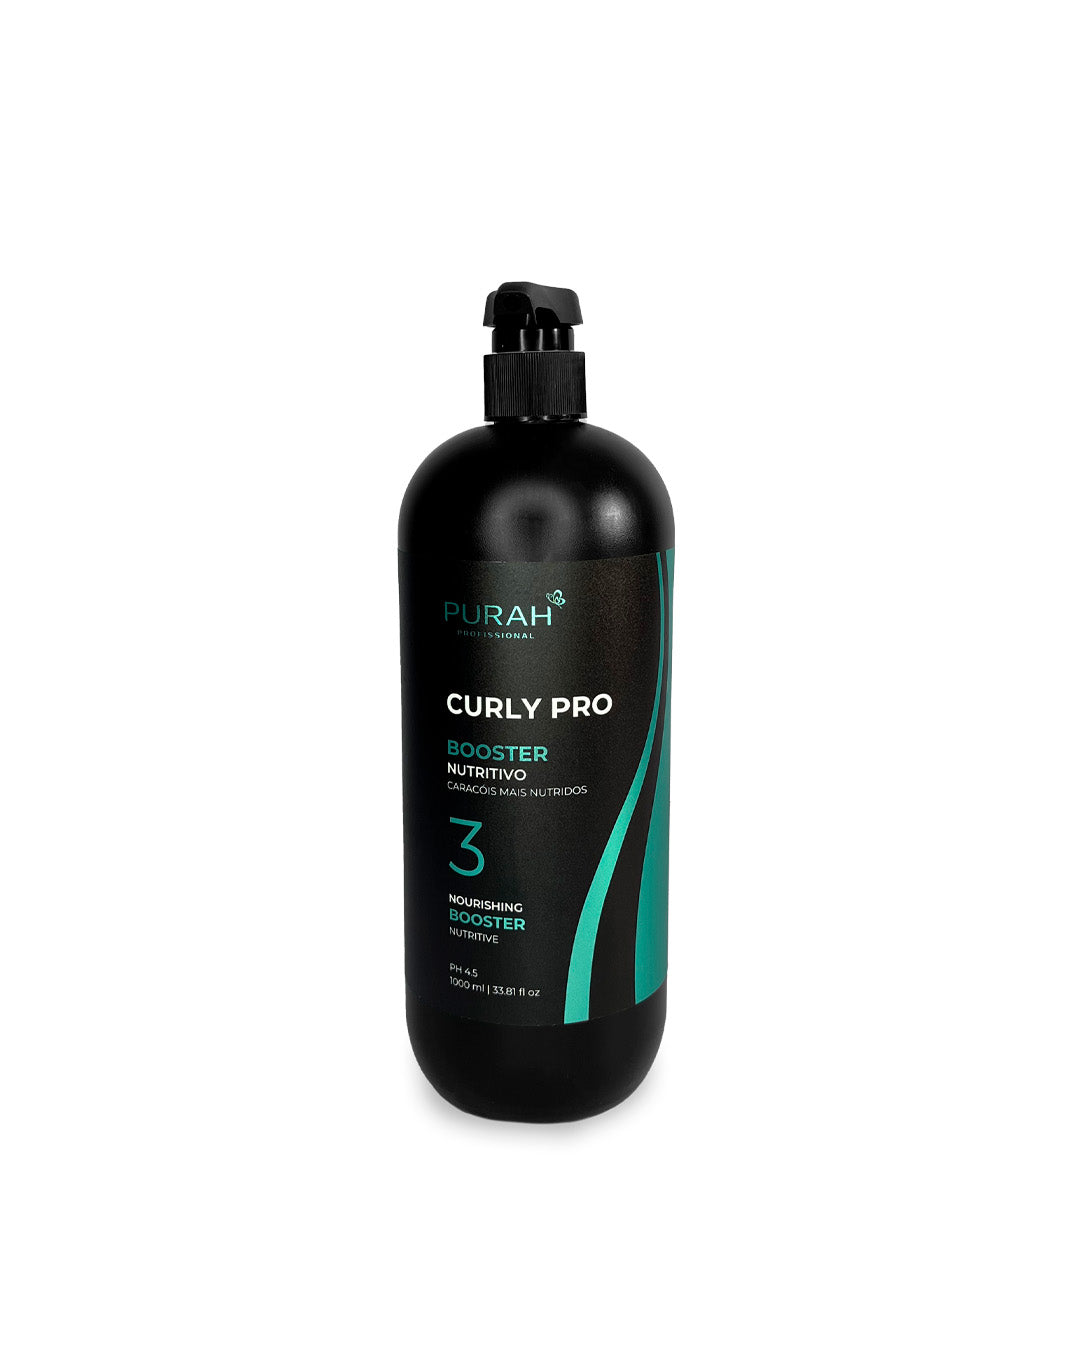 Curly Pro Booster Nutritivo